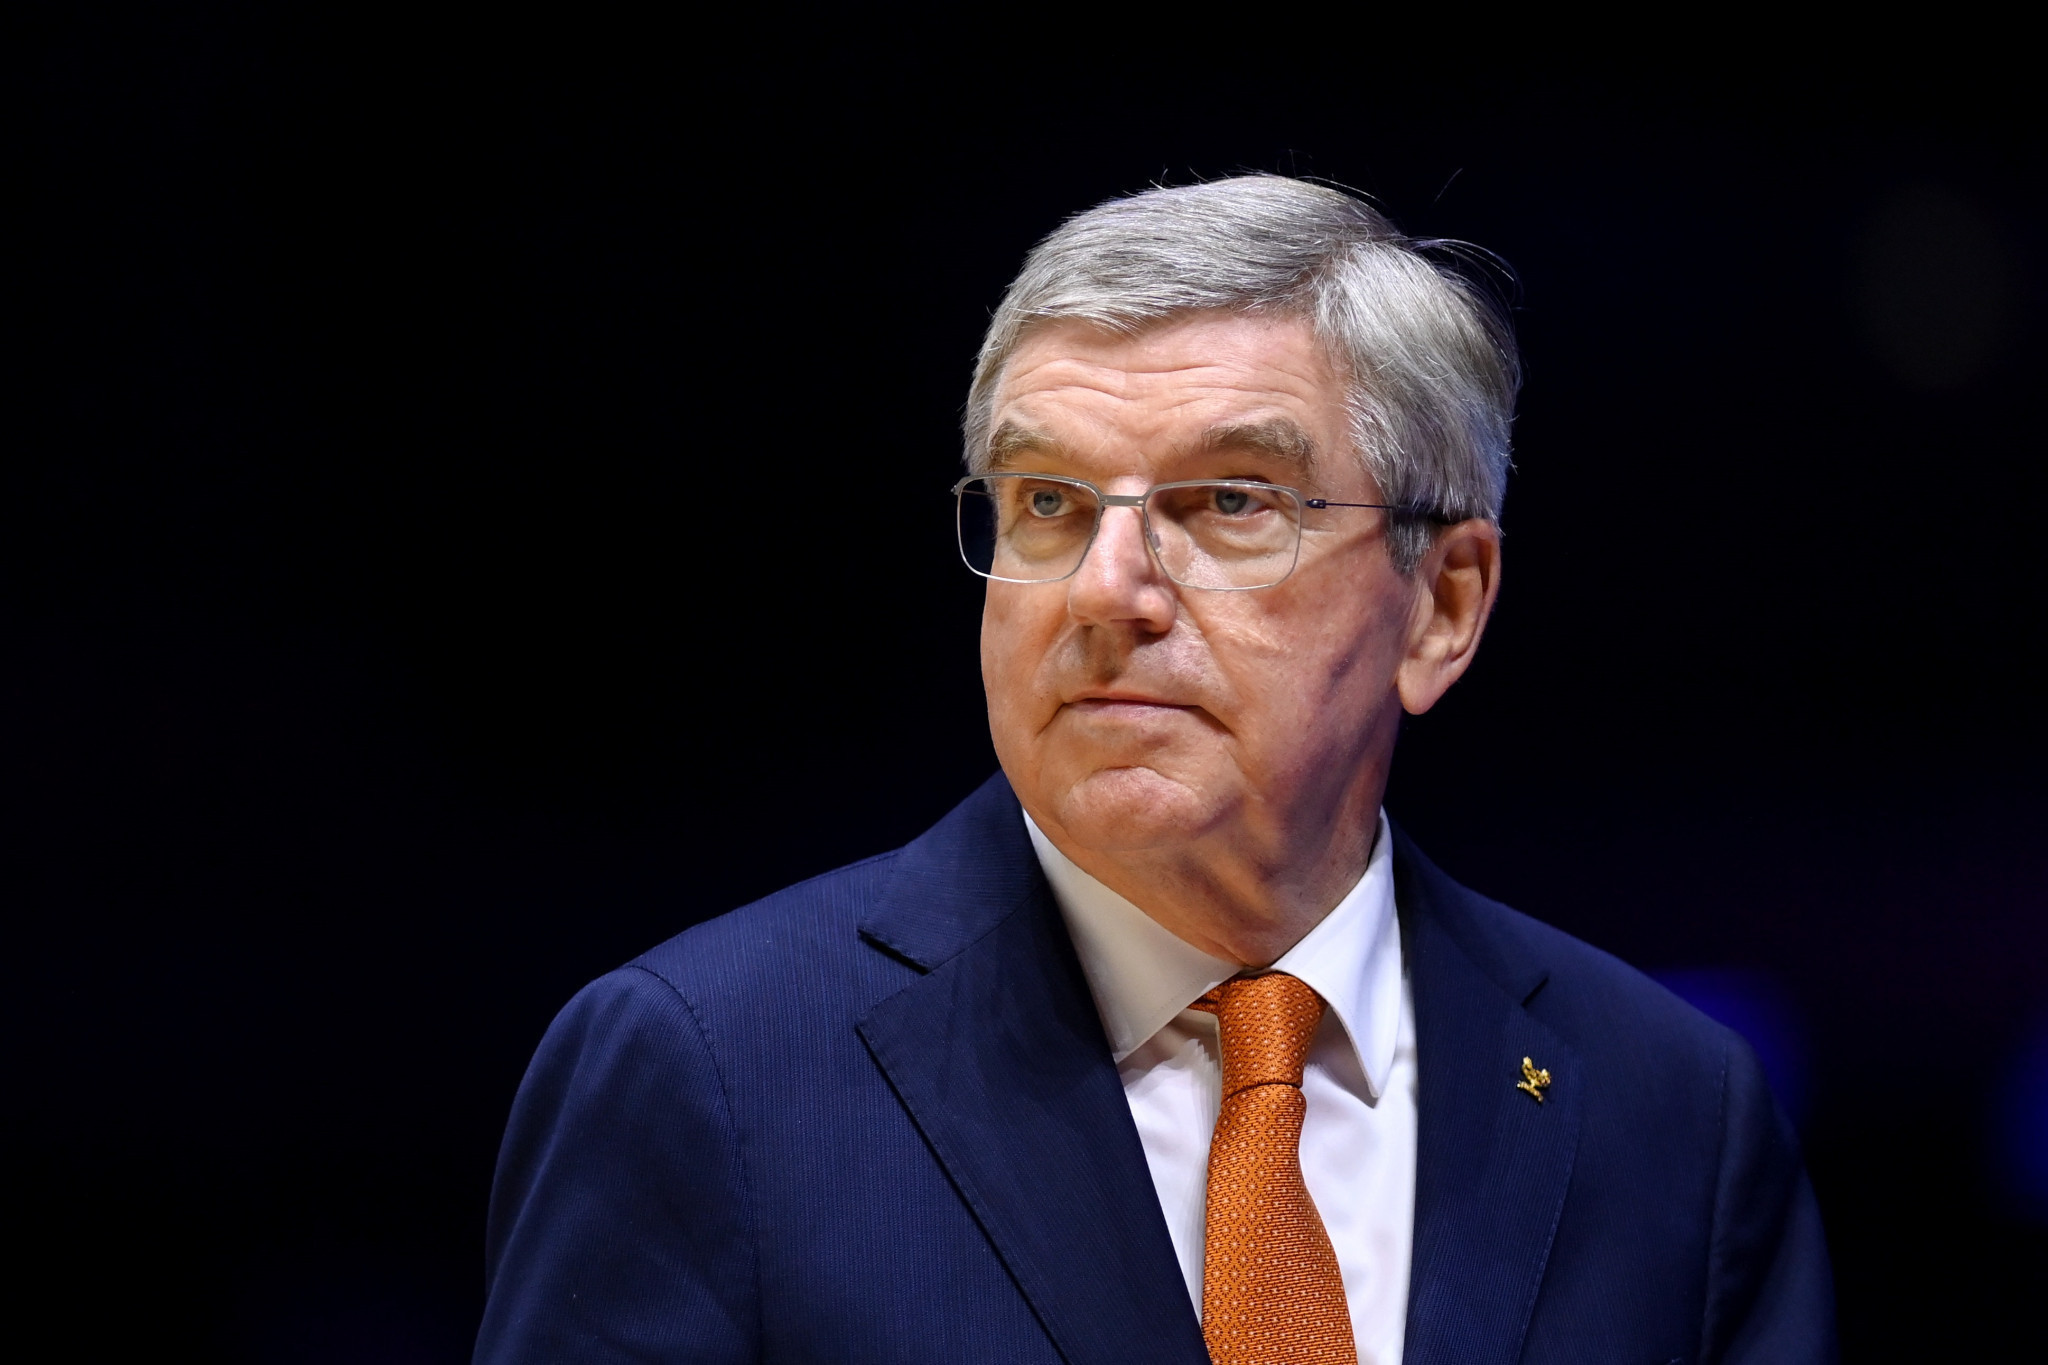 IOC President Thomas Bach reacted initially to the Russian invasion of Ukraine by recommending that Russian and Belarusian athletes should be banned from international events 